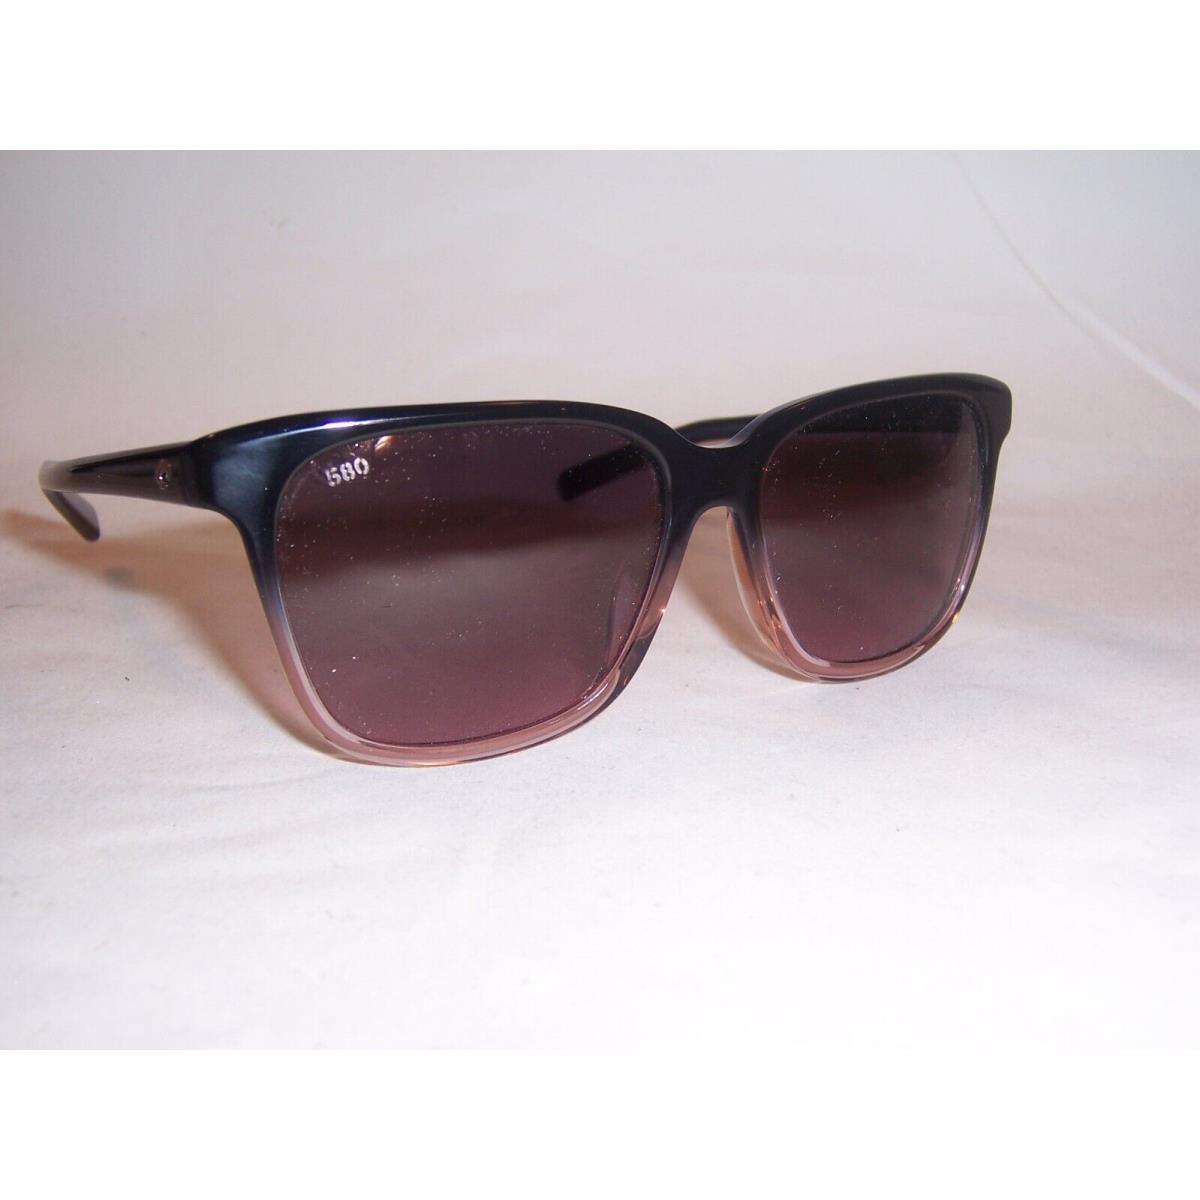 Costa Del Mar May Sunglasses Pink Sand/rose 580G Polarized